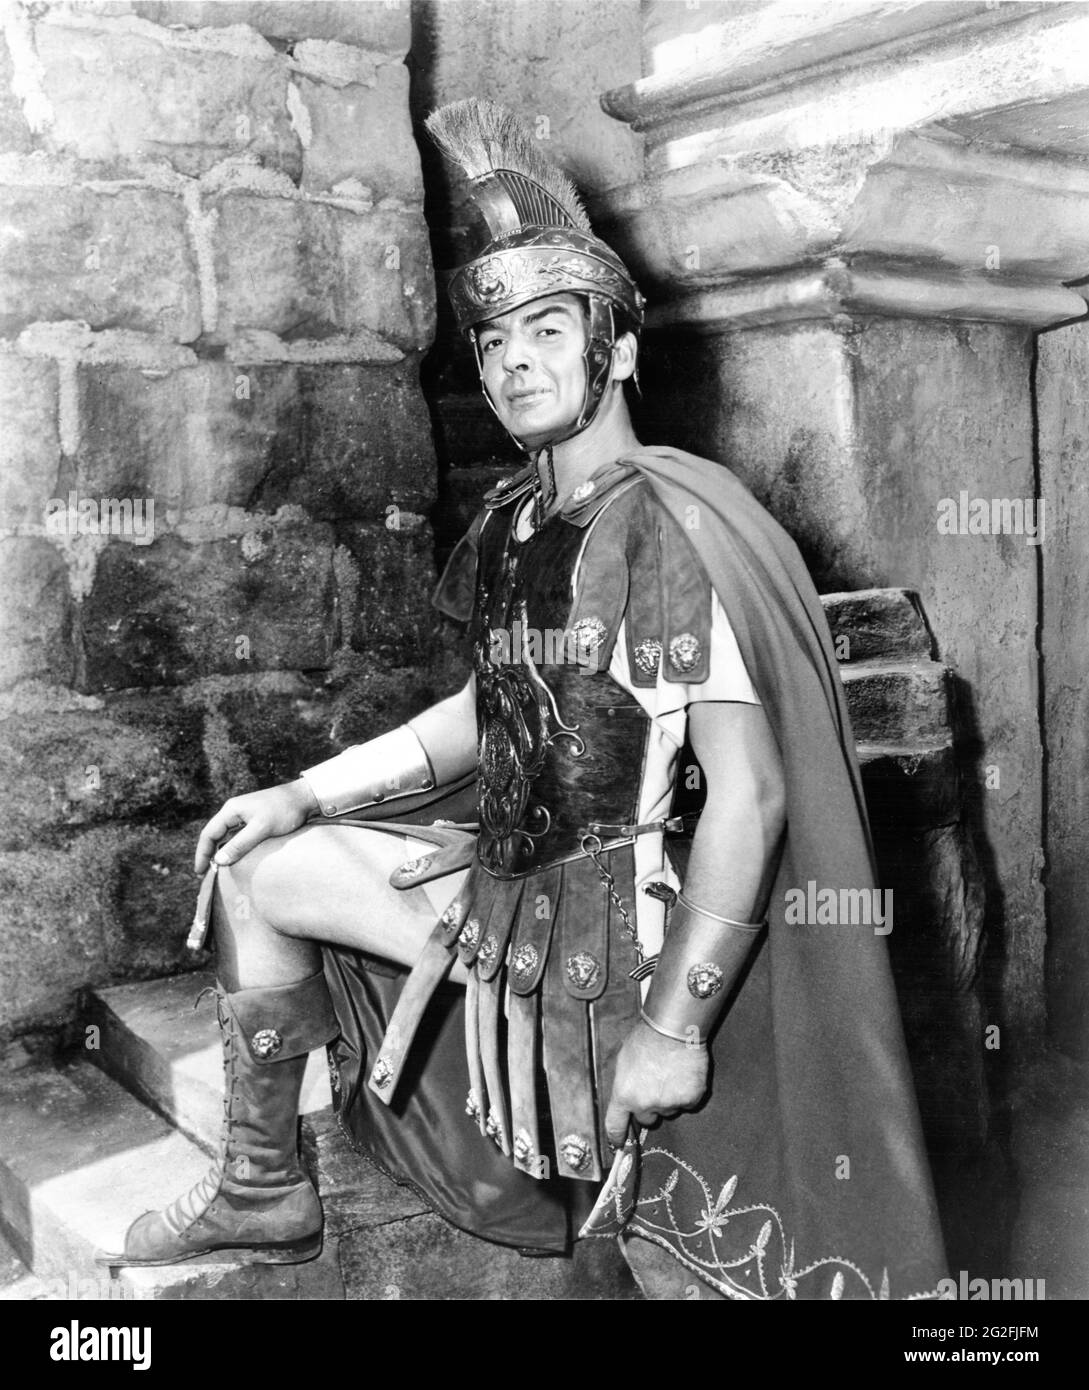 VICTOR MATURE publicity portrait as Demetrius in DEMETRIUS AND THE GLADIATORS 1954 director DELMER DAVES based on a character created by Lloyd C. Douglas in The Robe written by Philip Dunne music Franz Waxman producer Frank Ross Twentieth Century Fox Stock Photo